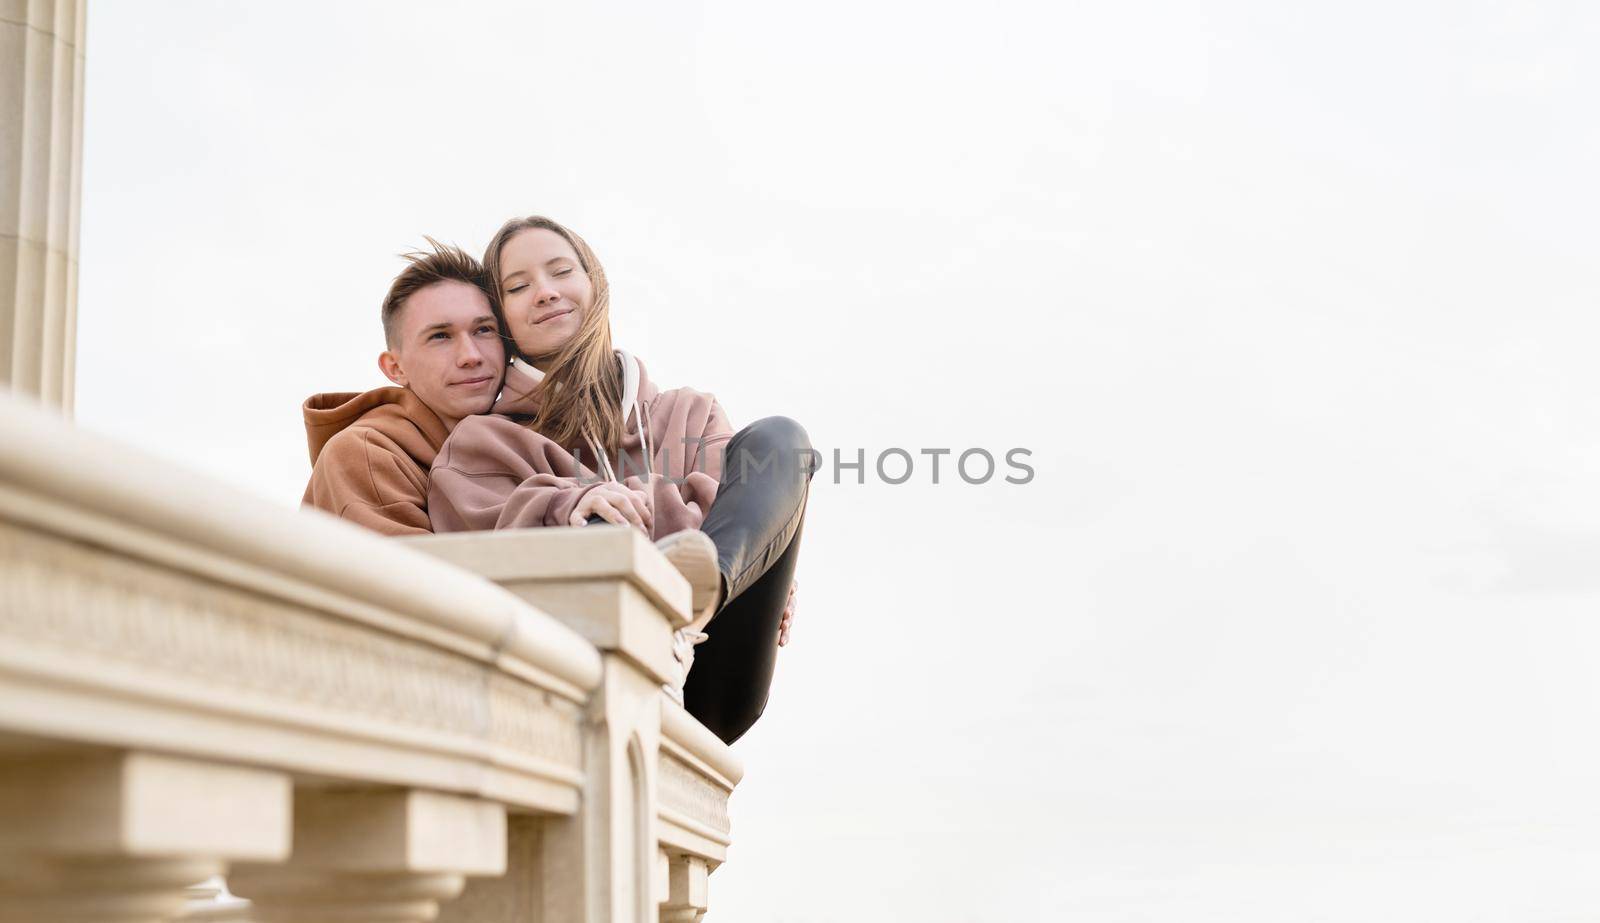 Happy young loving couple embracing each other outdoors in the park having fun